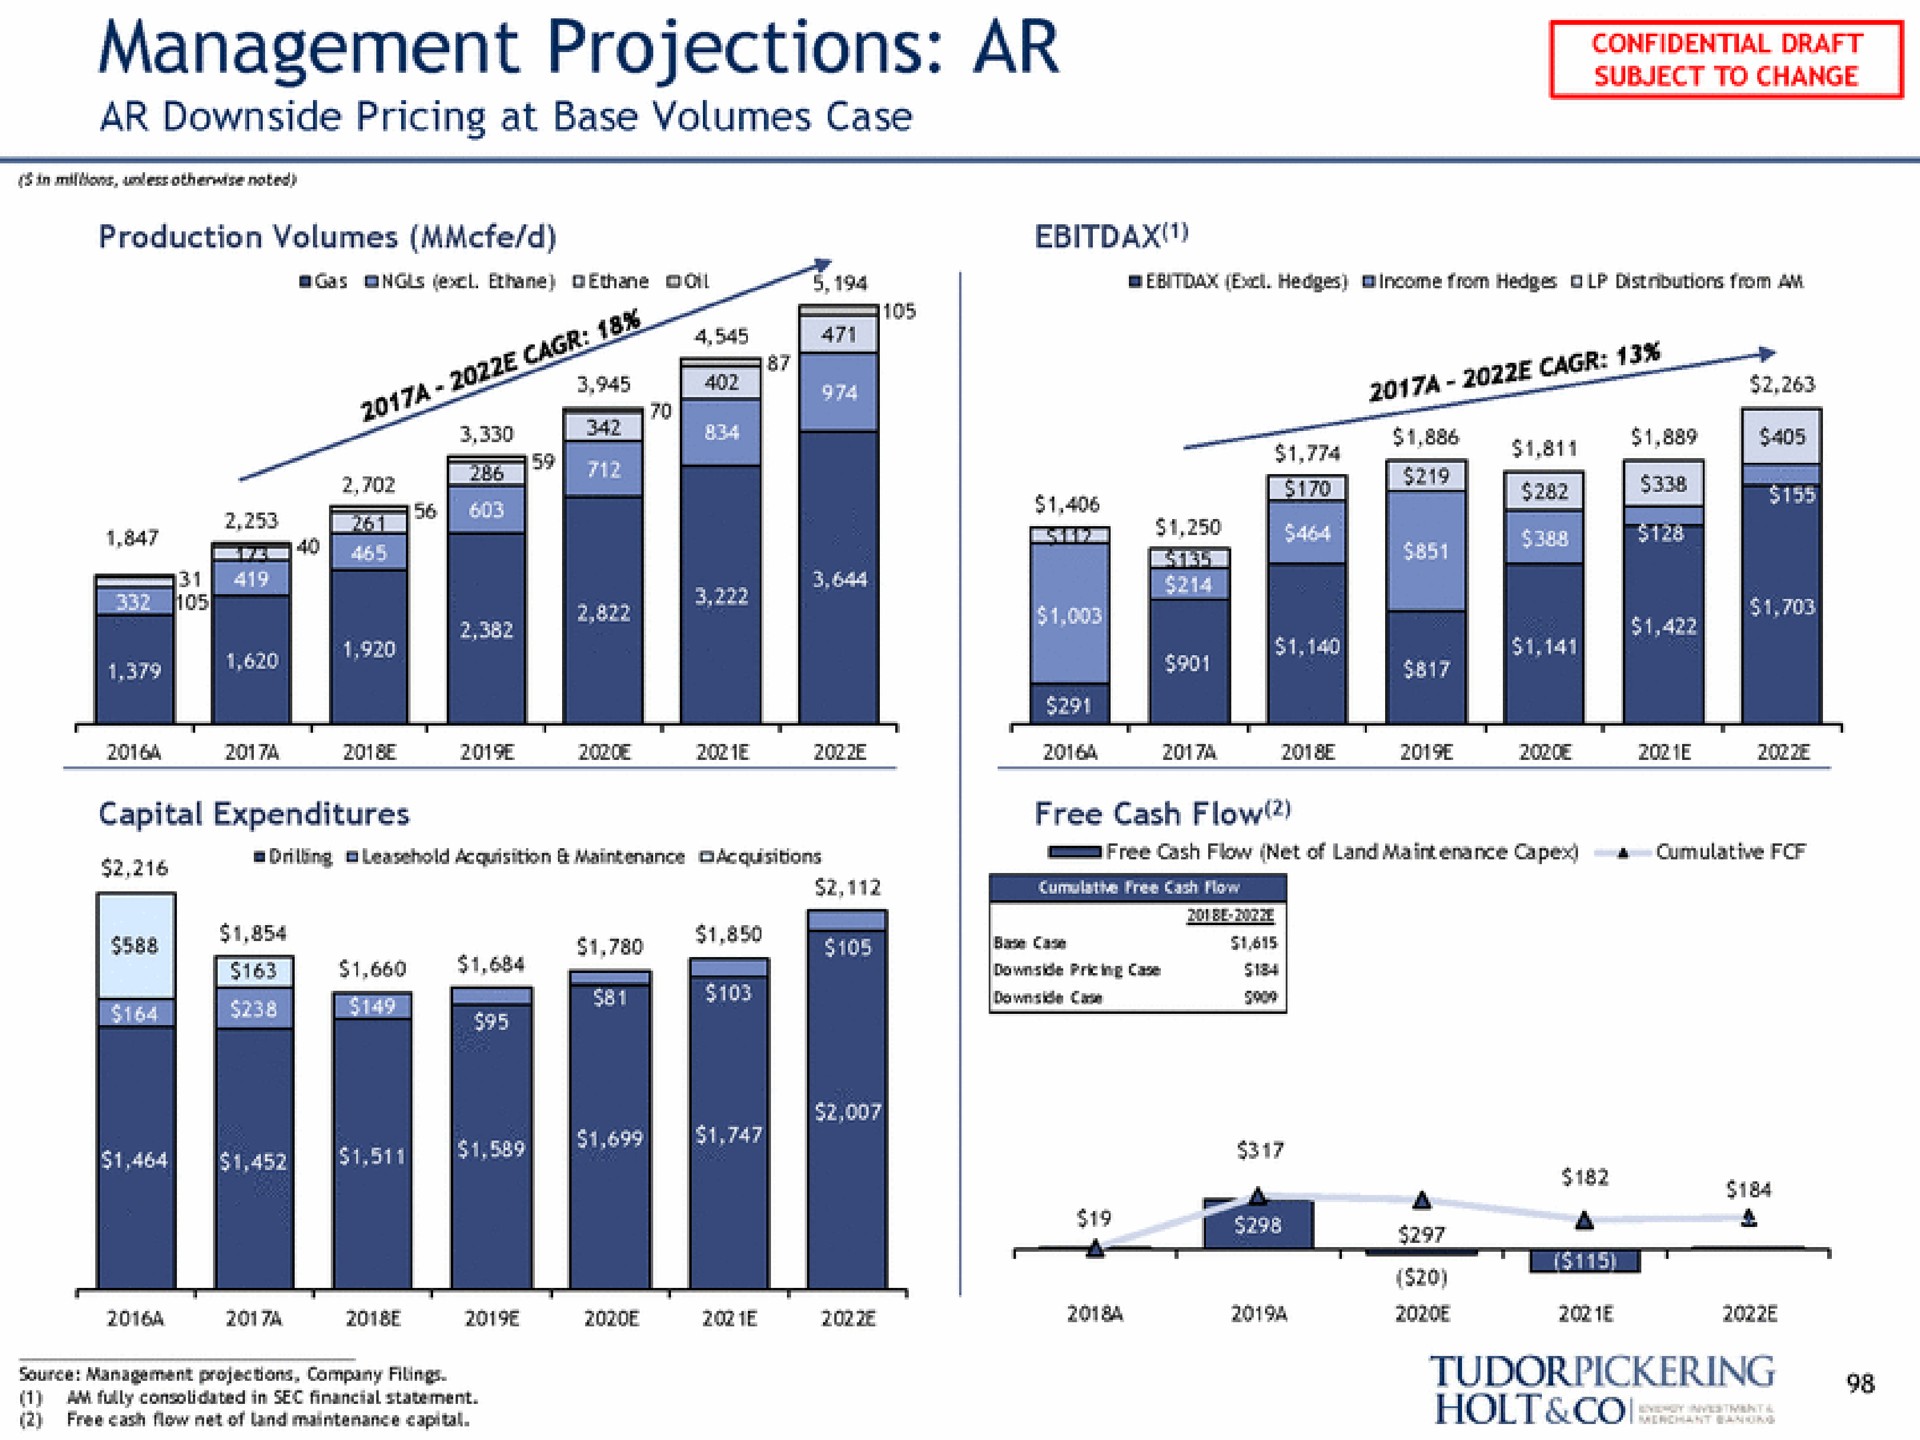 management projections downside pricing at base volumes case at | Tudor, Pickering, Holt & Co